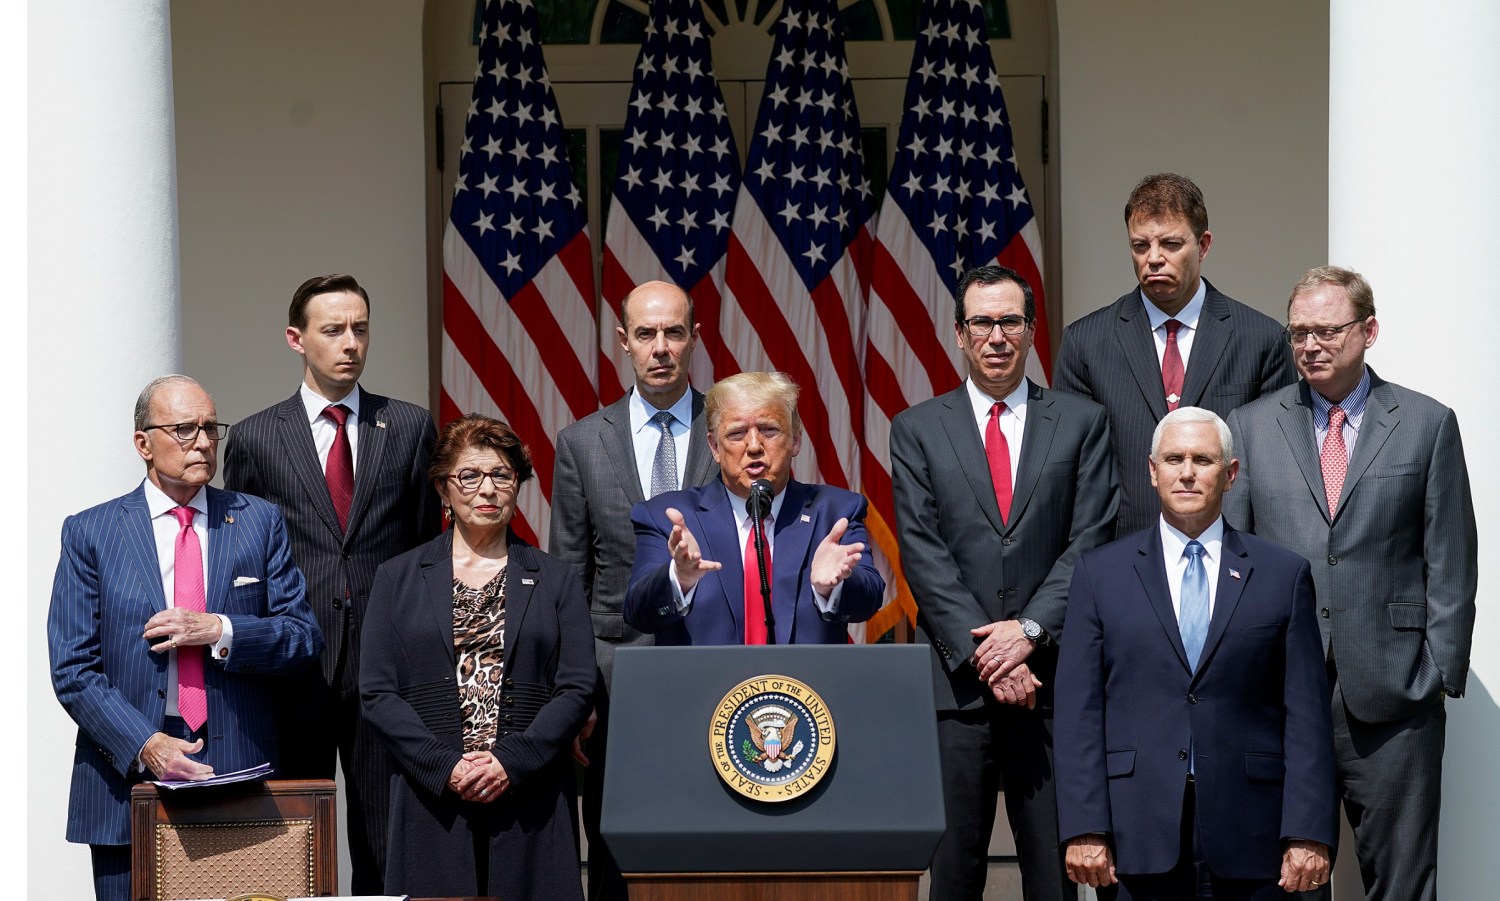 U.S. President Donald Trump talks about a U.S. jobs report amid the coronavirus disease (COVID-19) pandemic as he addresses a news conference as members of his administration listen in the Rose Garden at the White House in Washington, U.S., June 5, 2020. REUTERS/Kevin Lamarque